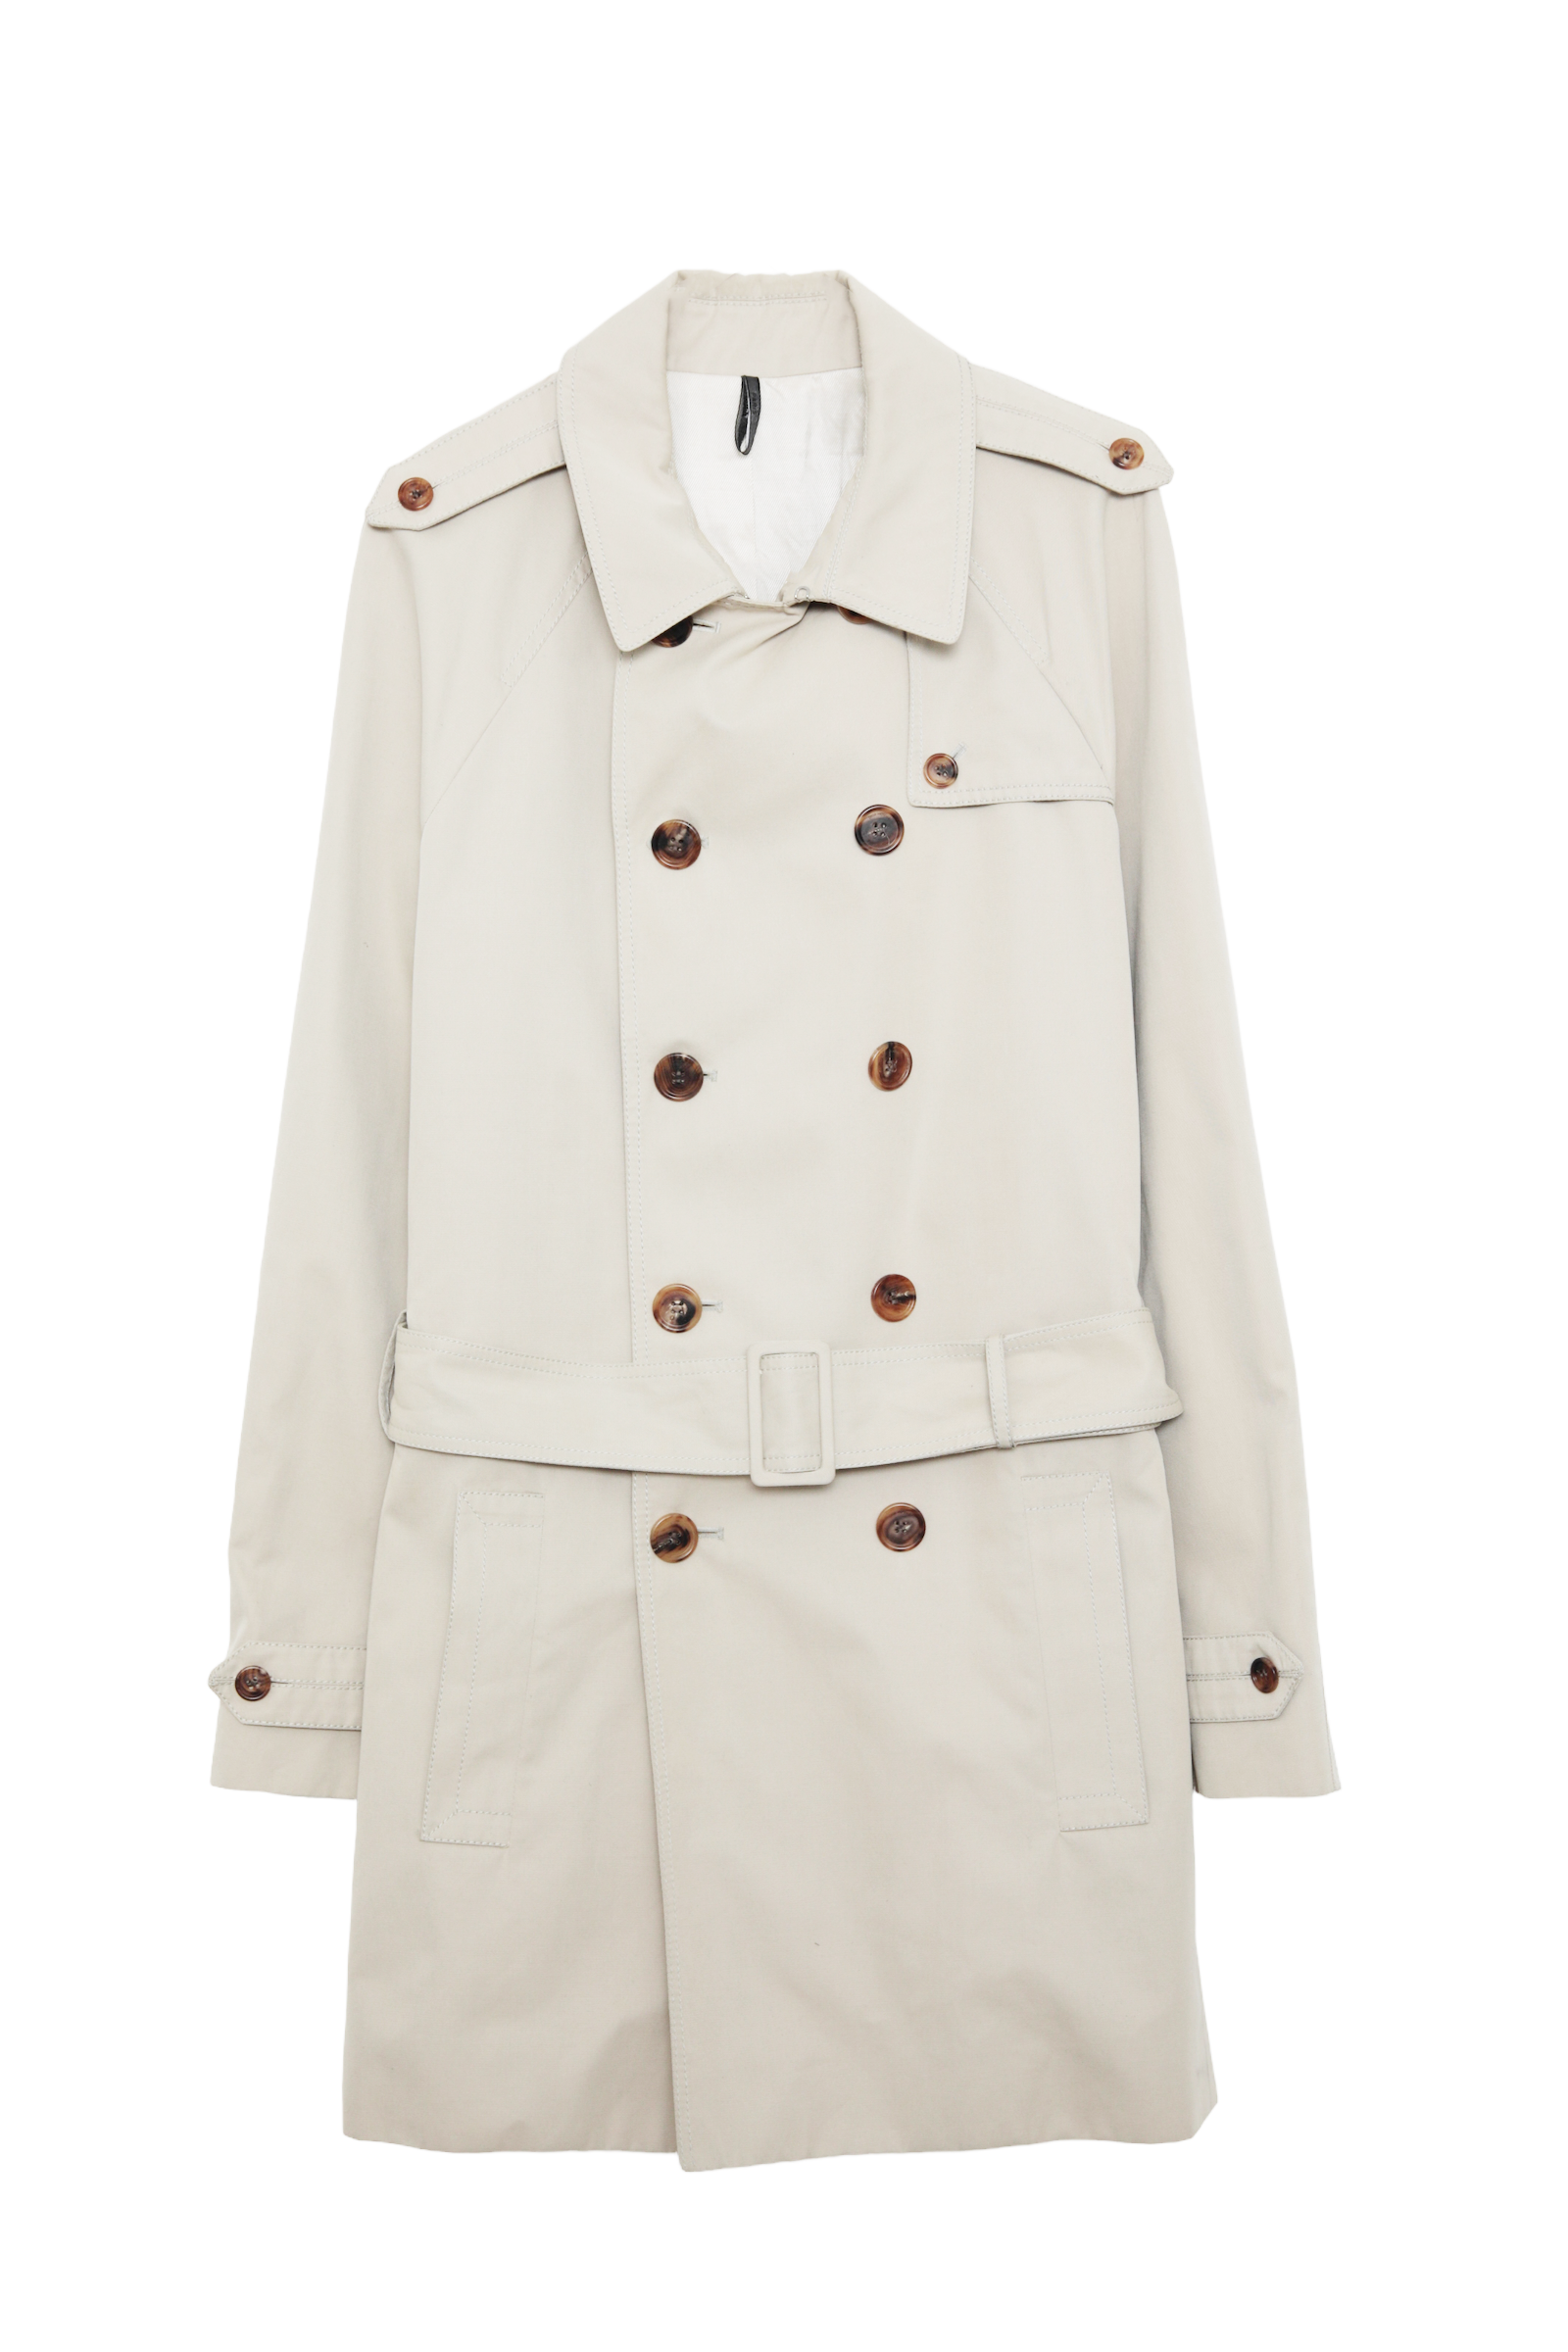 2008s DIOR HOMME COTTON TRENCH COAT